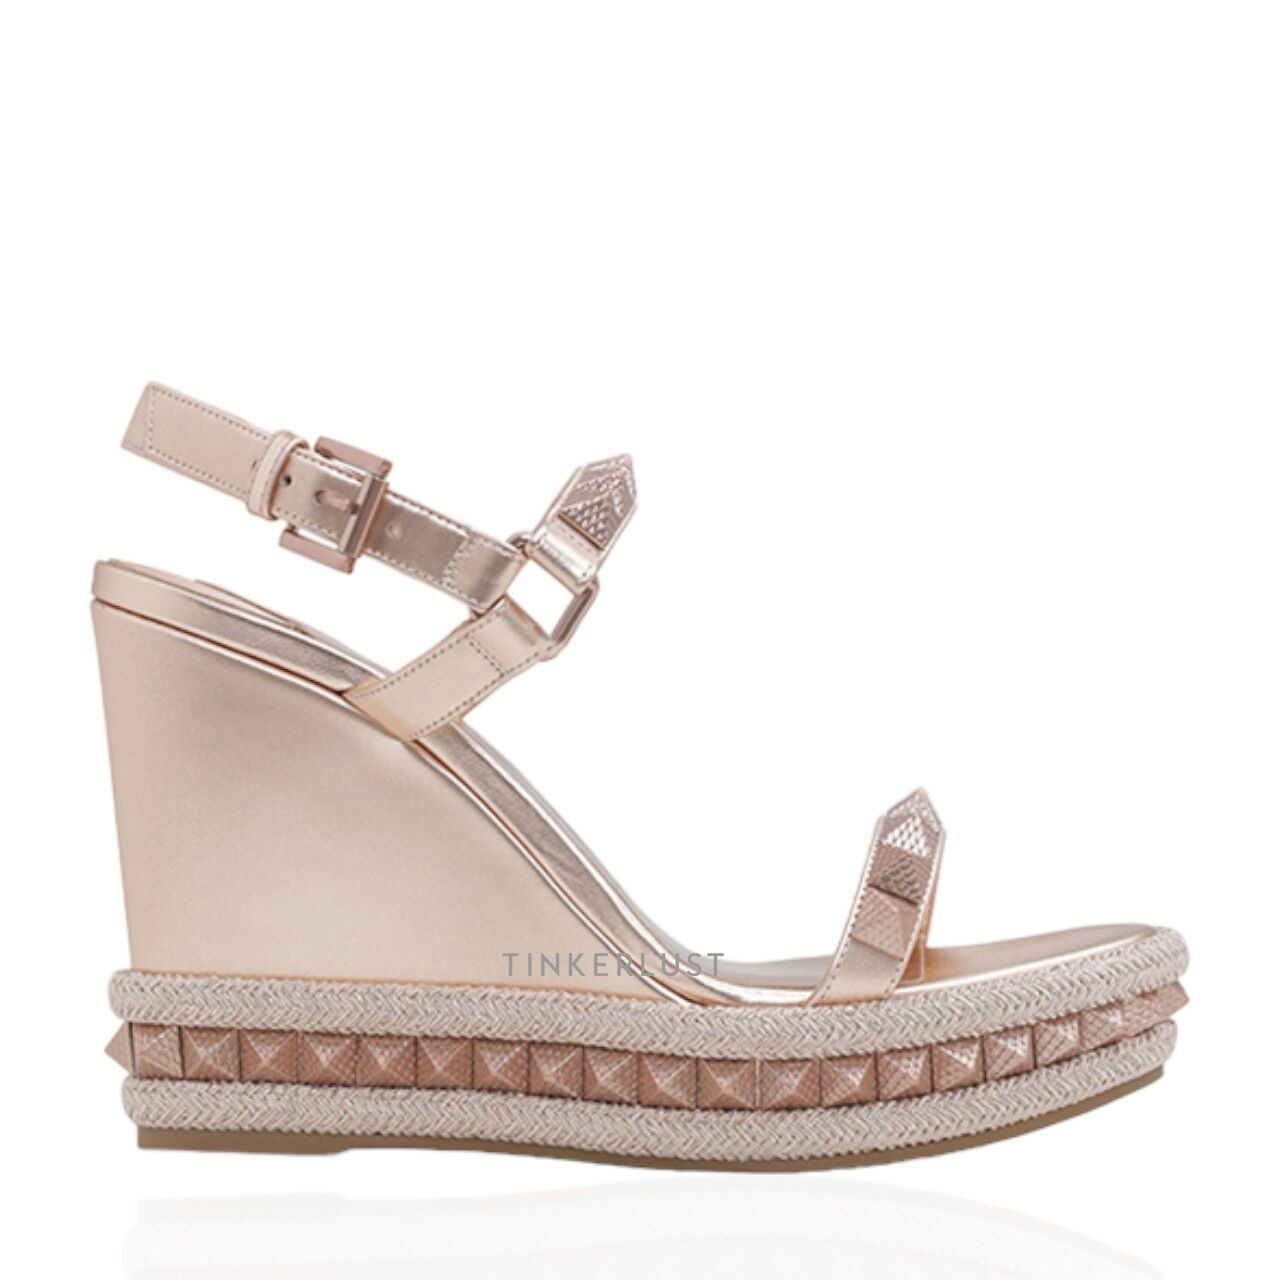 CHRISTIAN LOUBOUTIN Pyraclou 110mm Espadrilles in Beige Leather